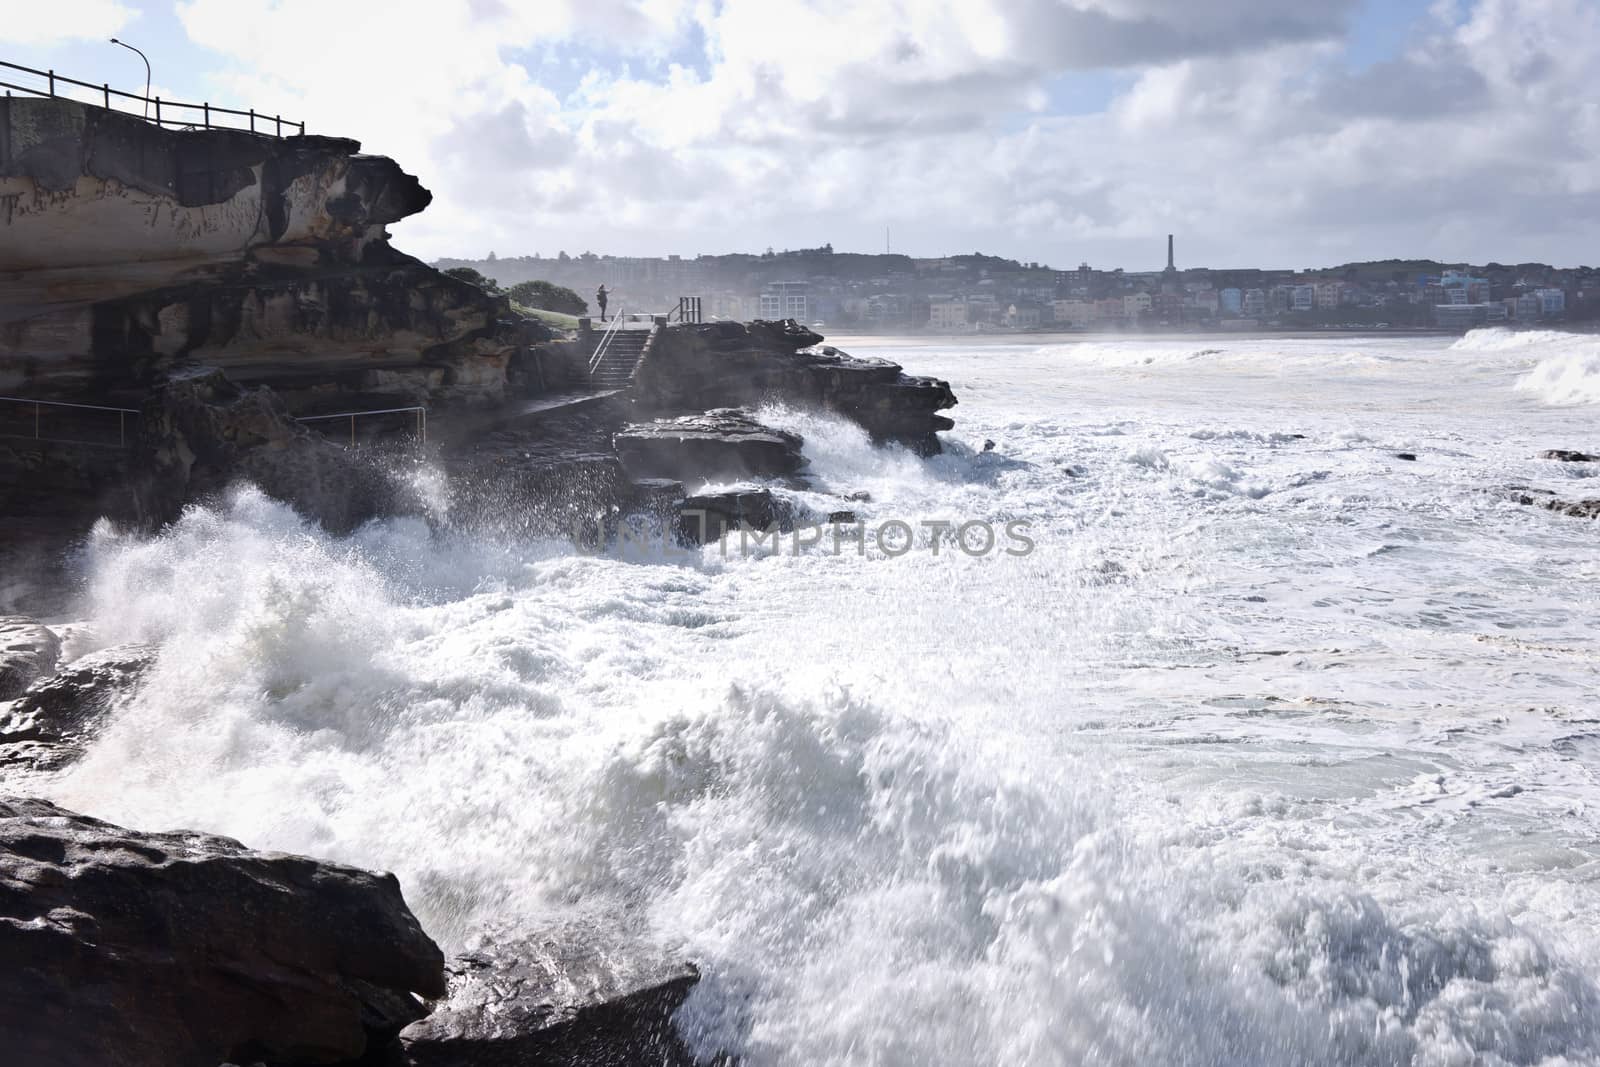 Powerful white waves breaking on a rocky shore at Bondi Beach in Sydney, Australia during a cyclone